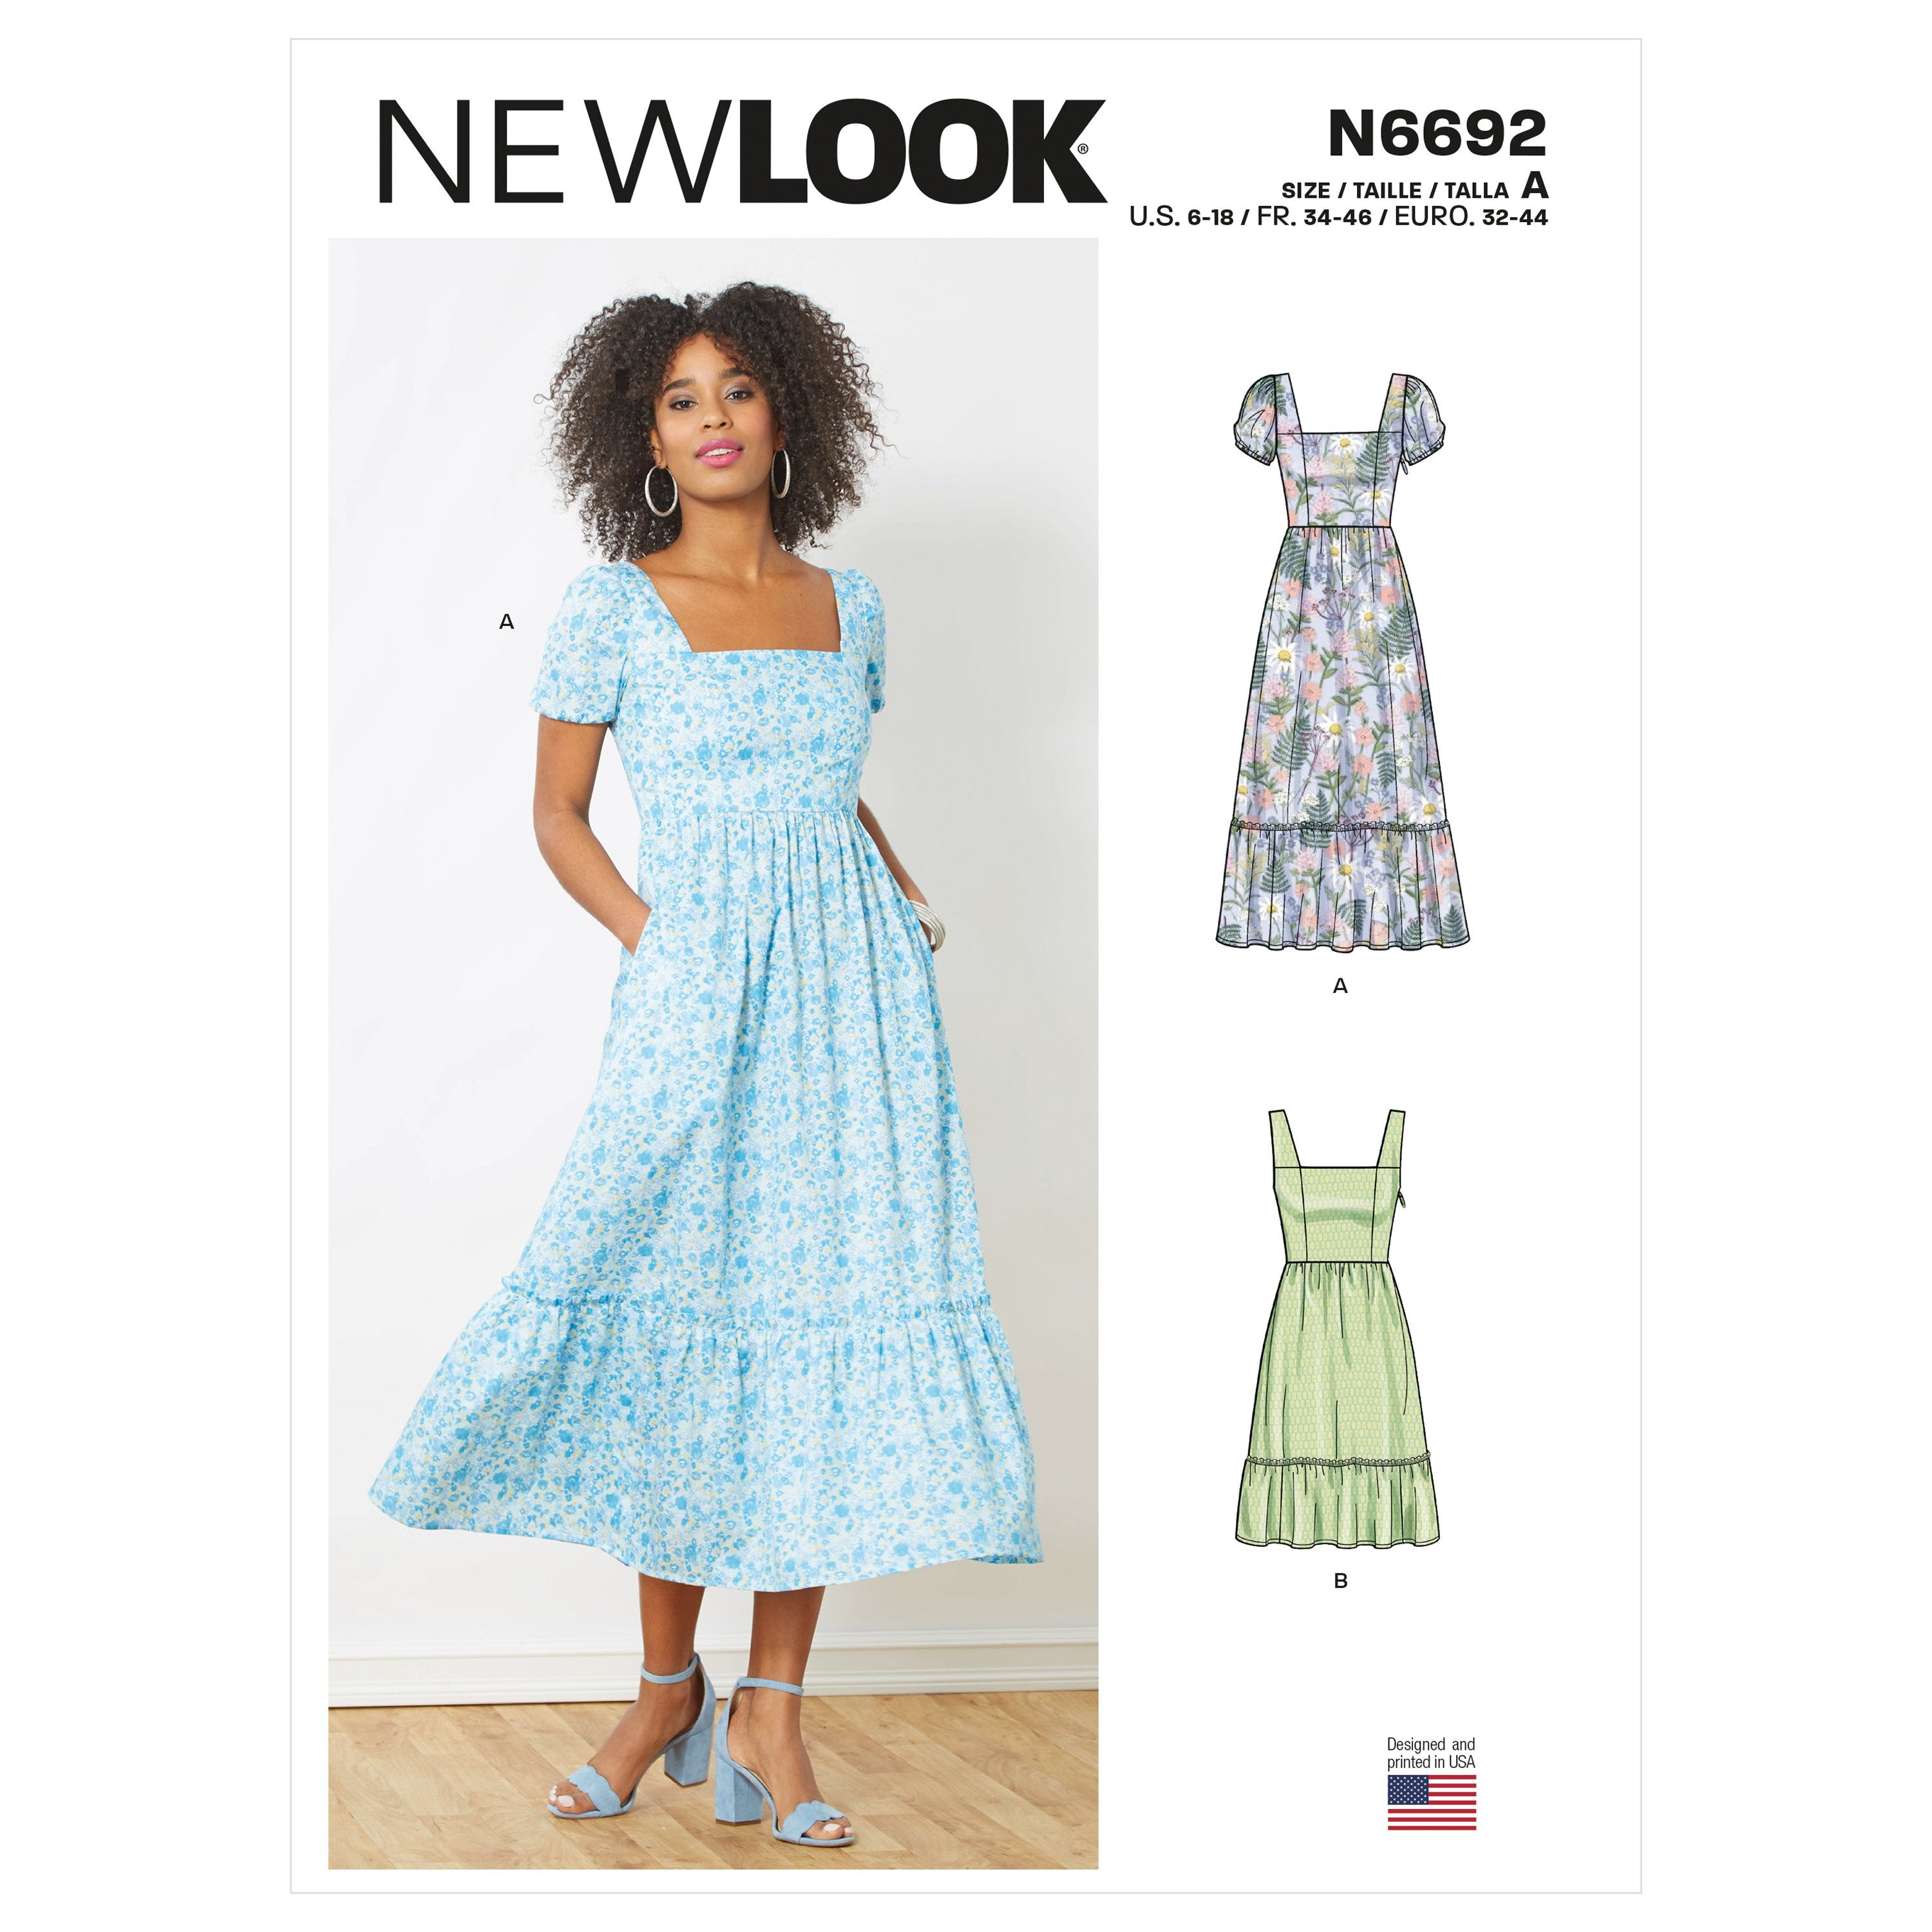 New Look Sewing Pattern 6692 Dresses from Jaycotts Sewing Supplies